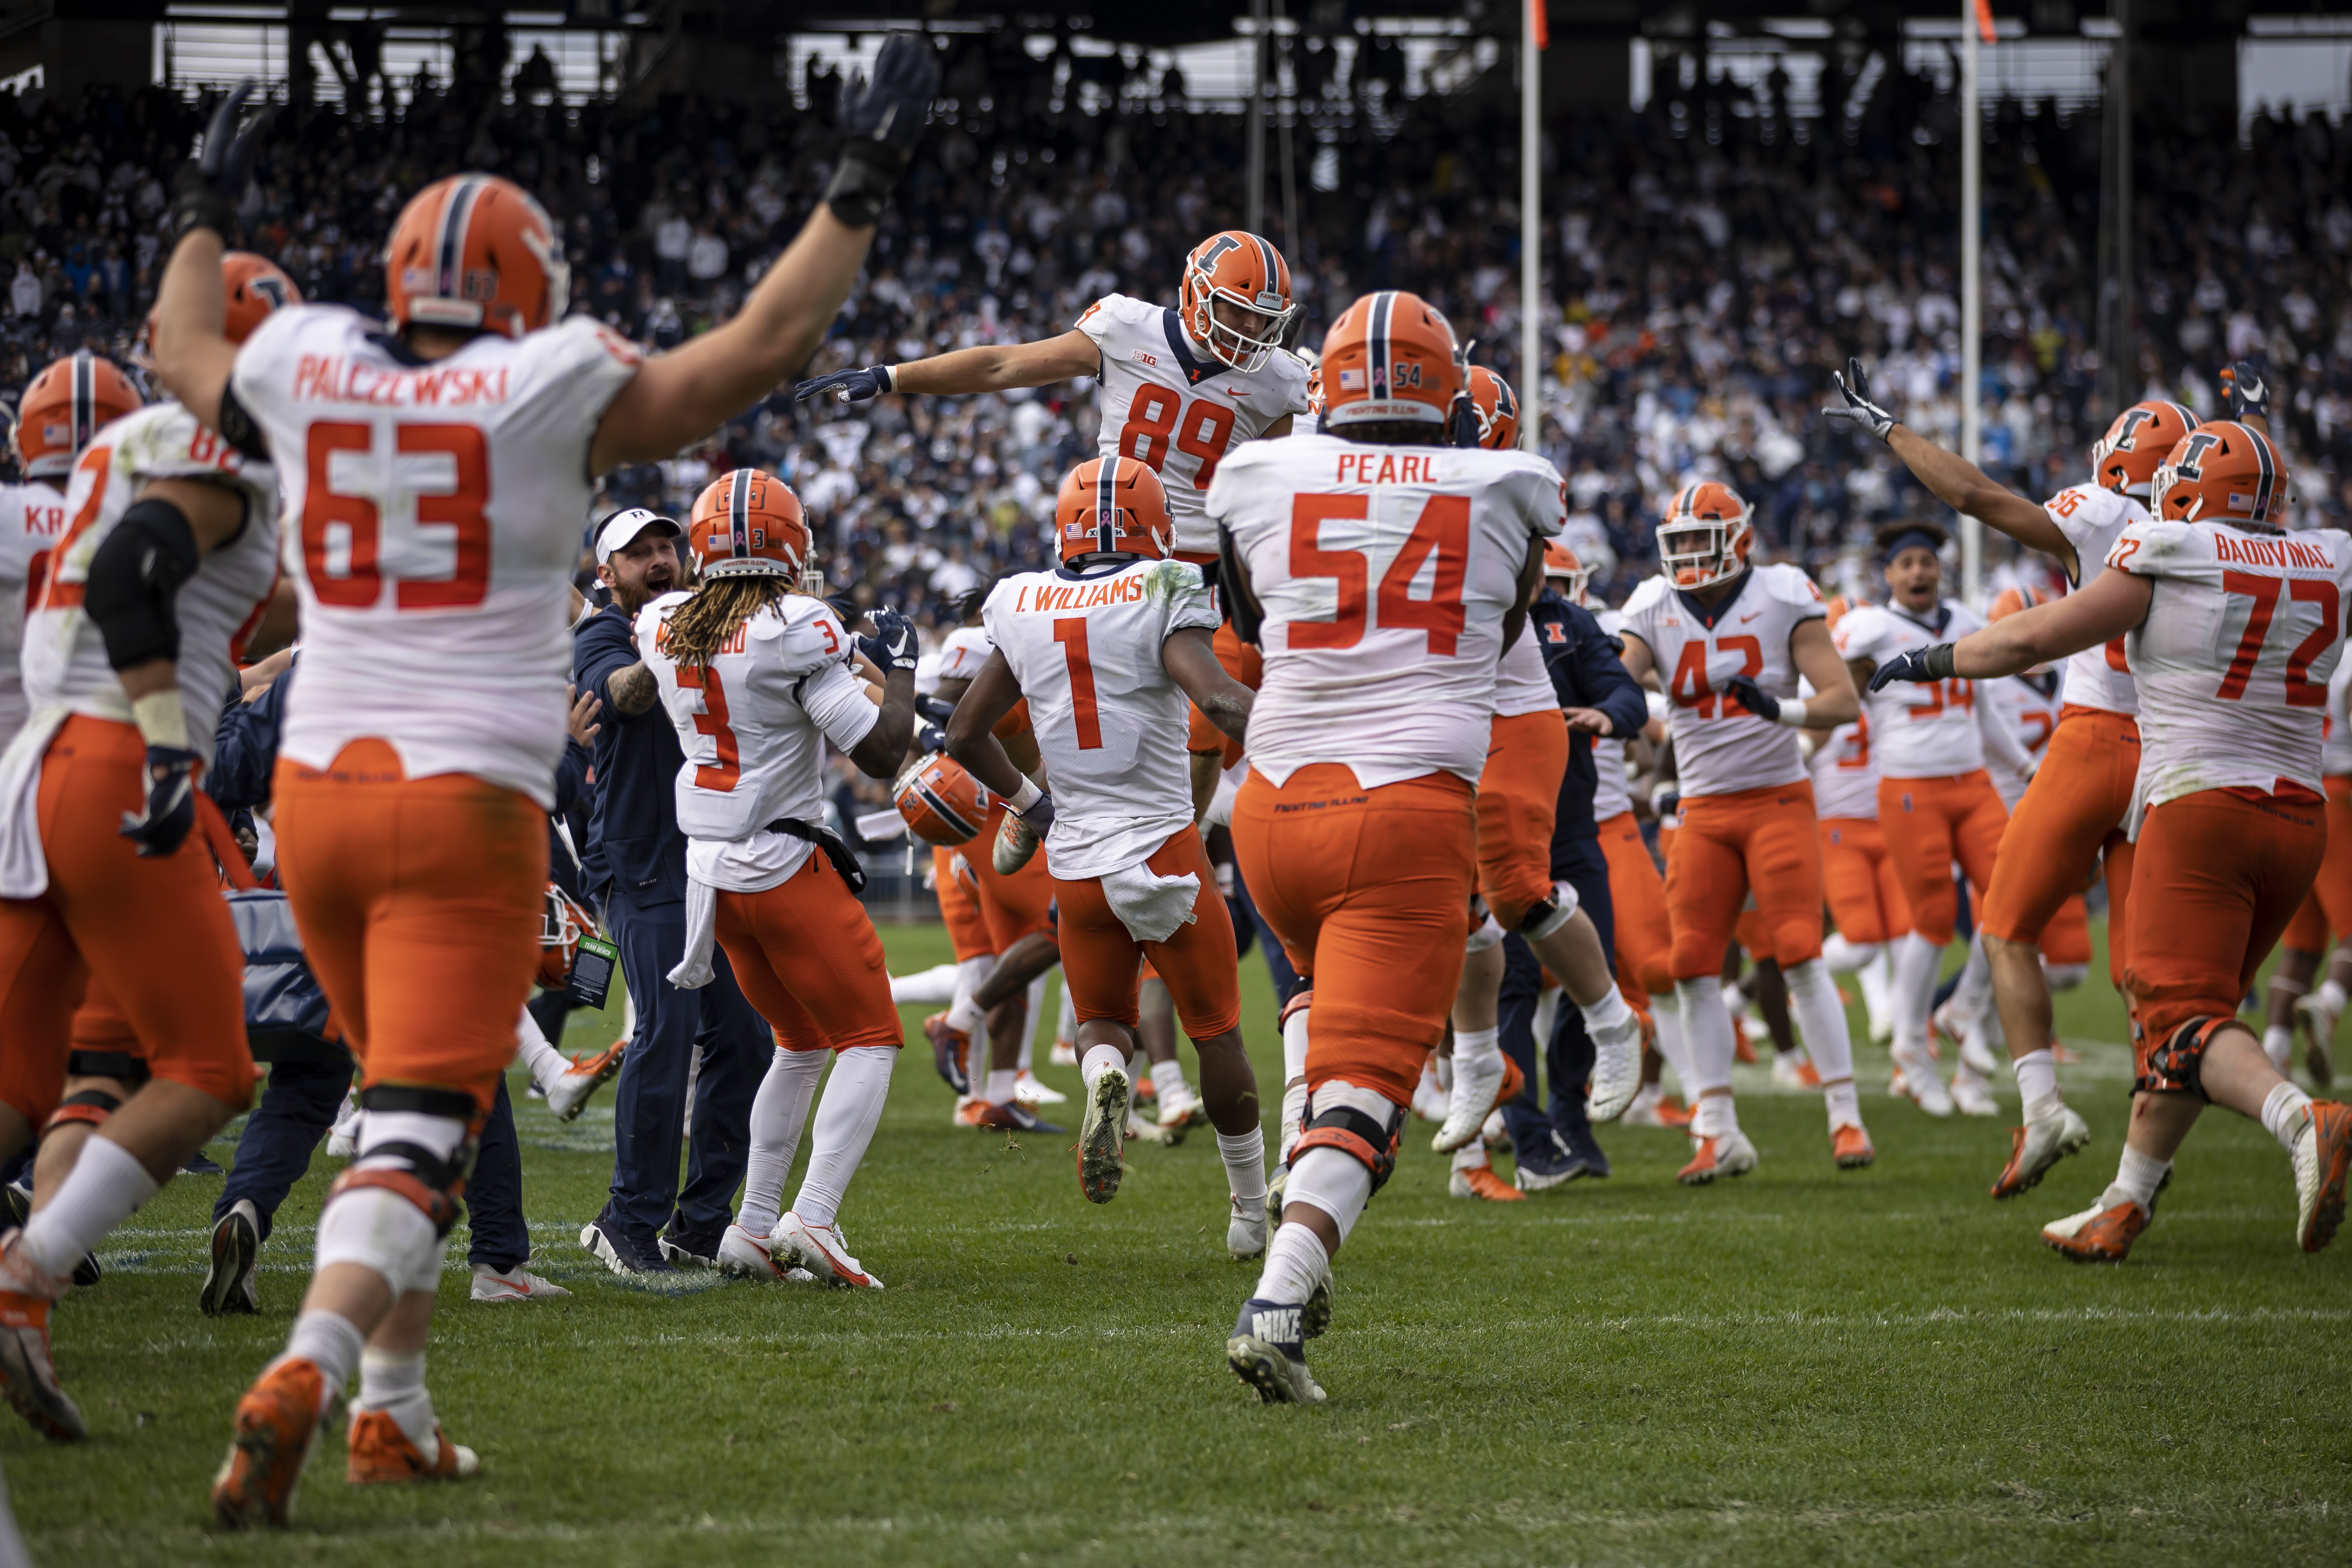 Illinois Upsets Penn State In Historic 9-Overtime Game